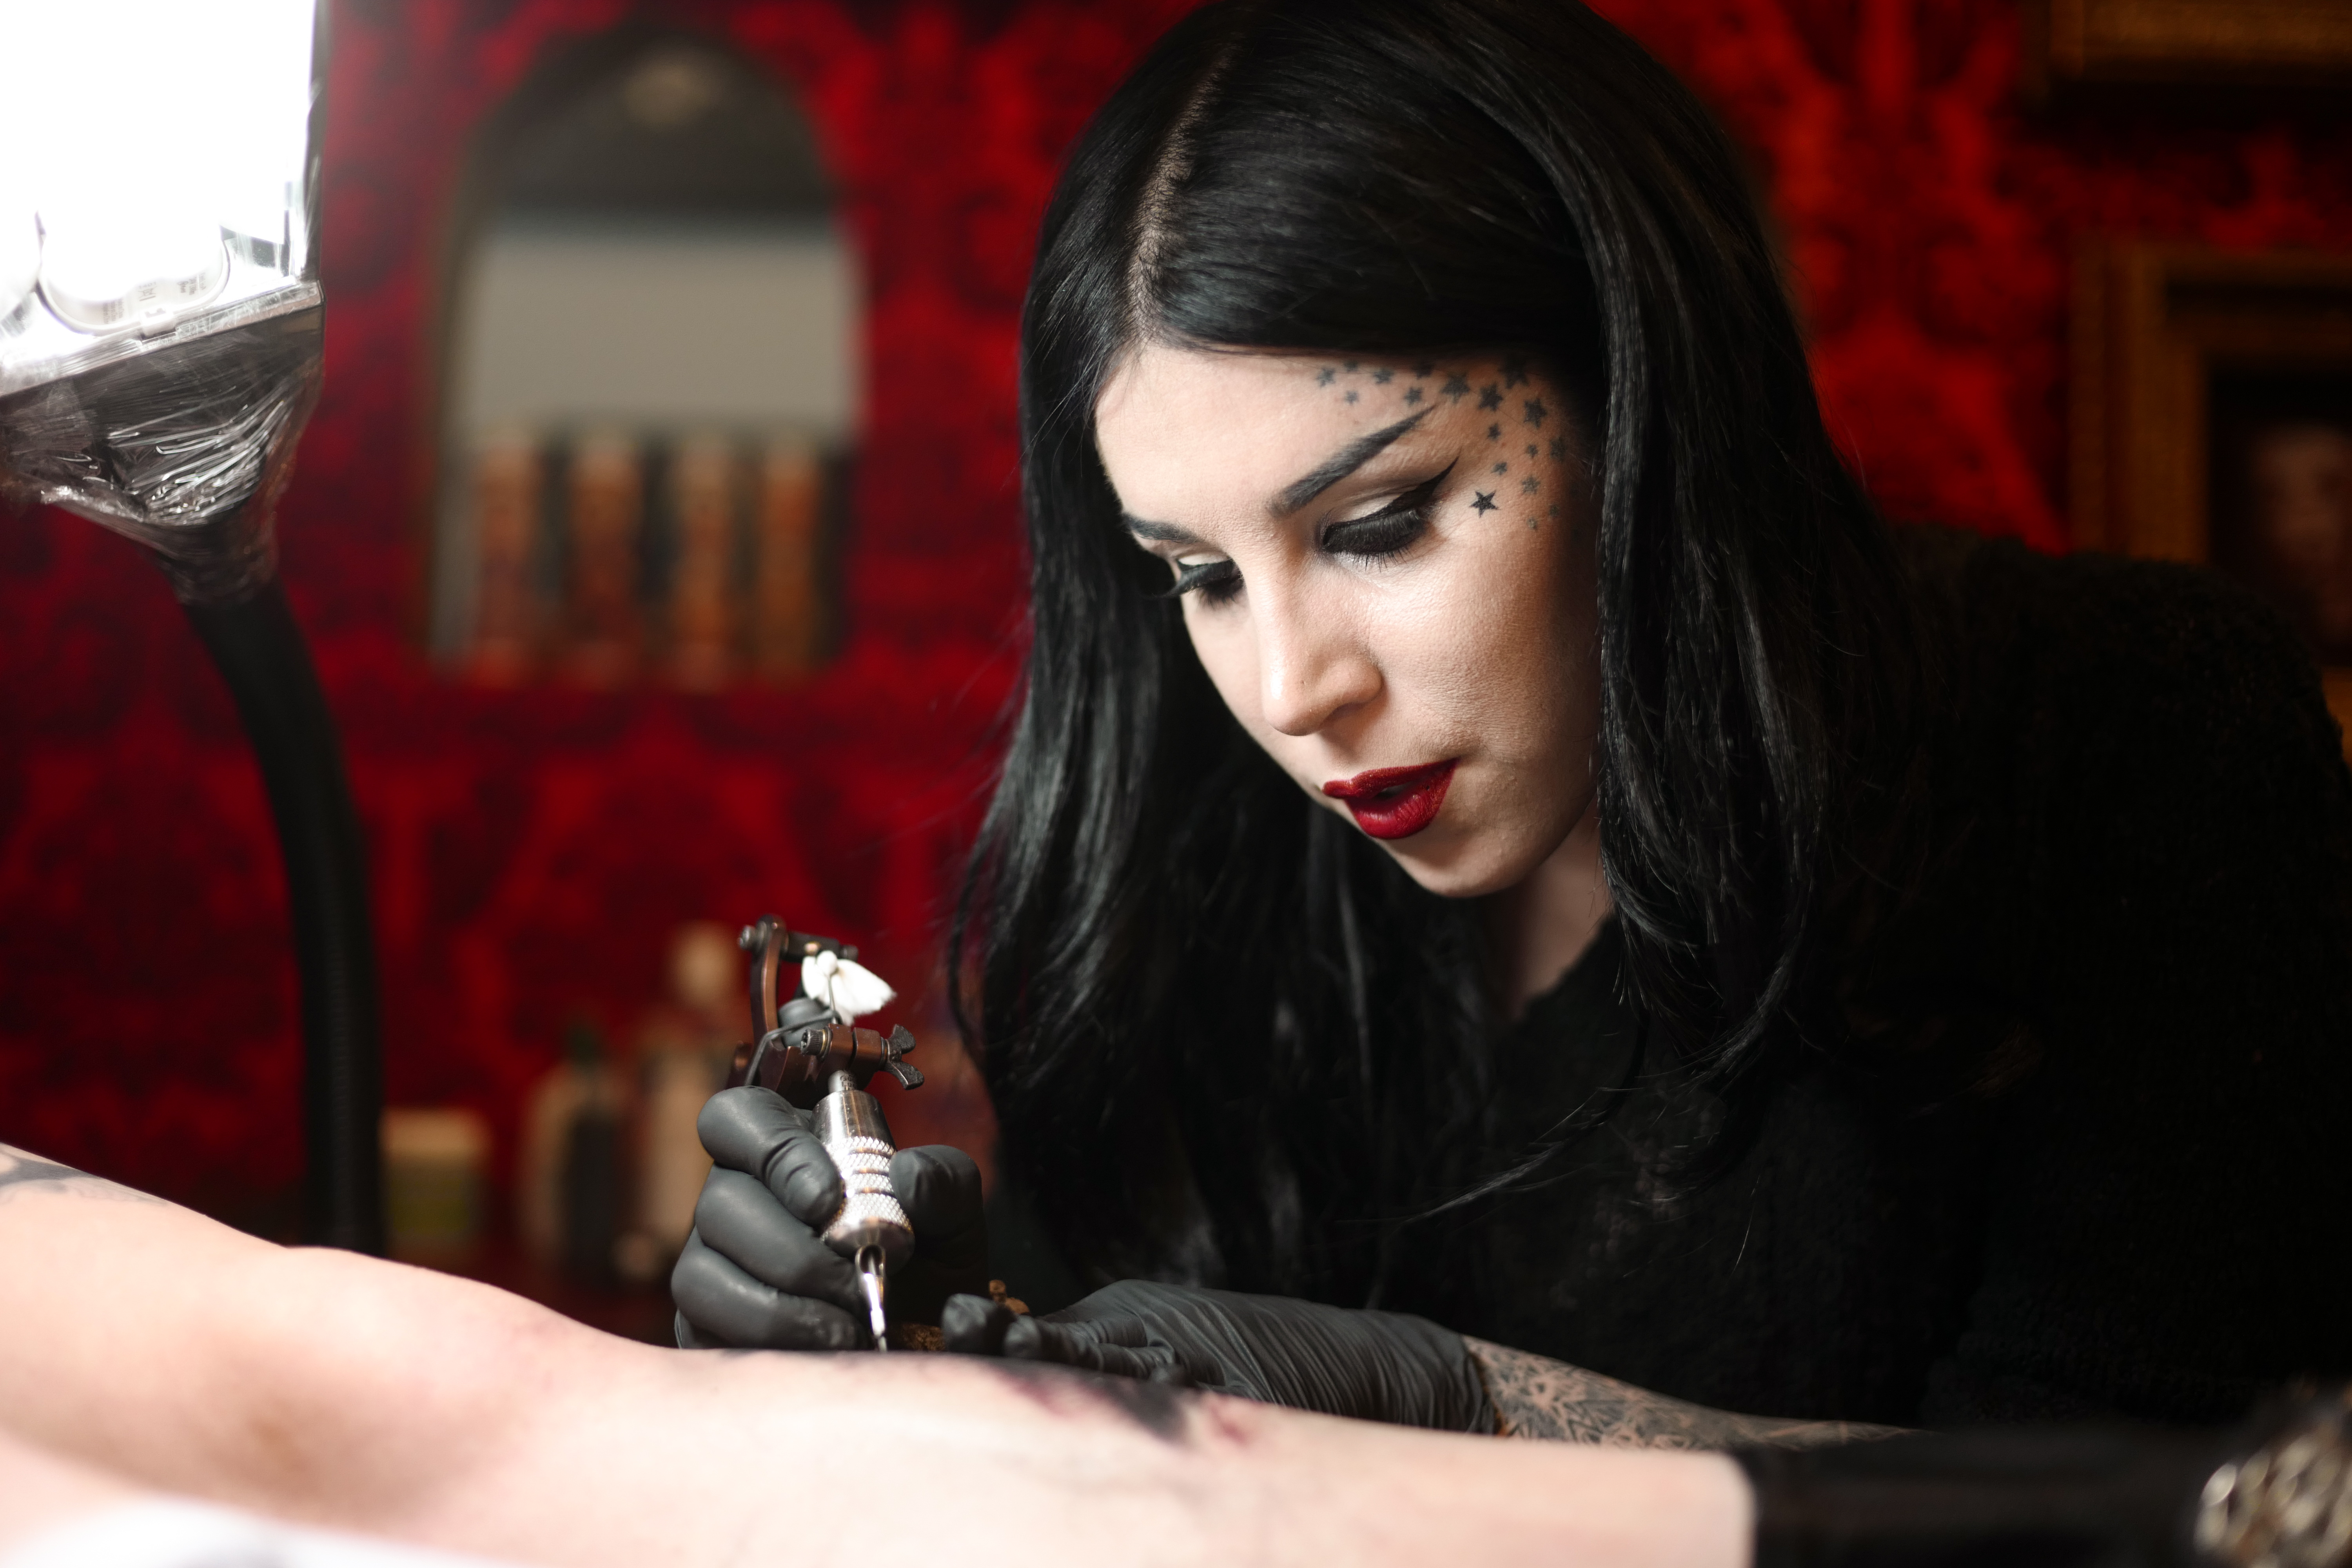 Kat Von D tattoos a person’s arm at her West Hollywood tattoo studio.